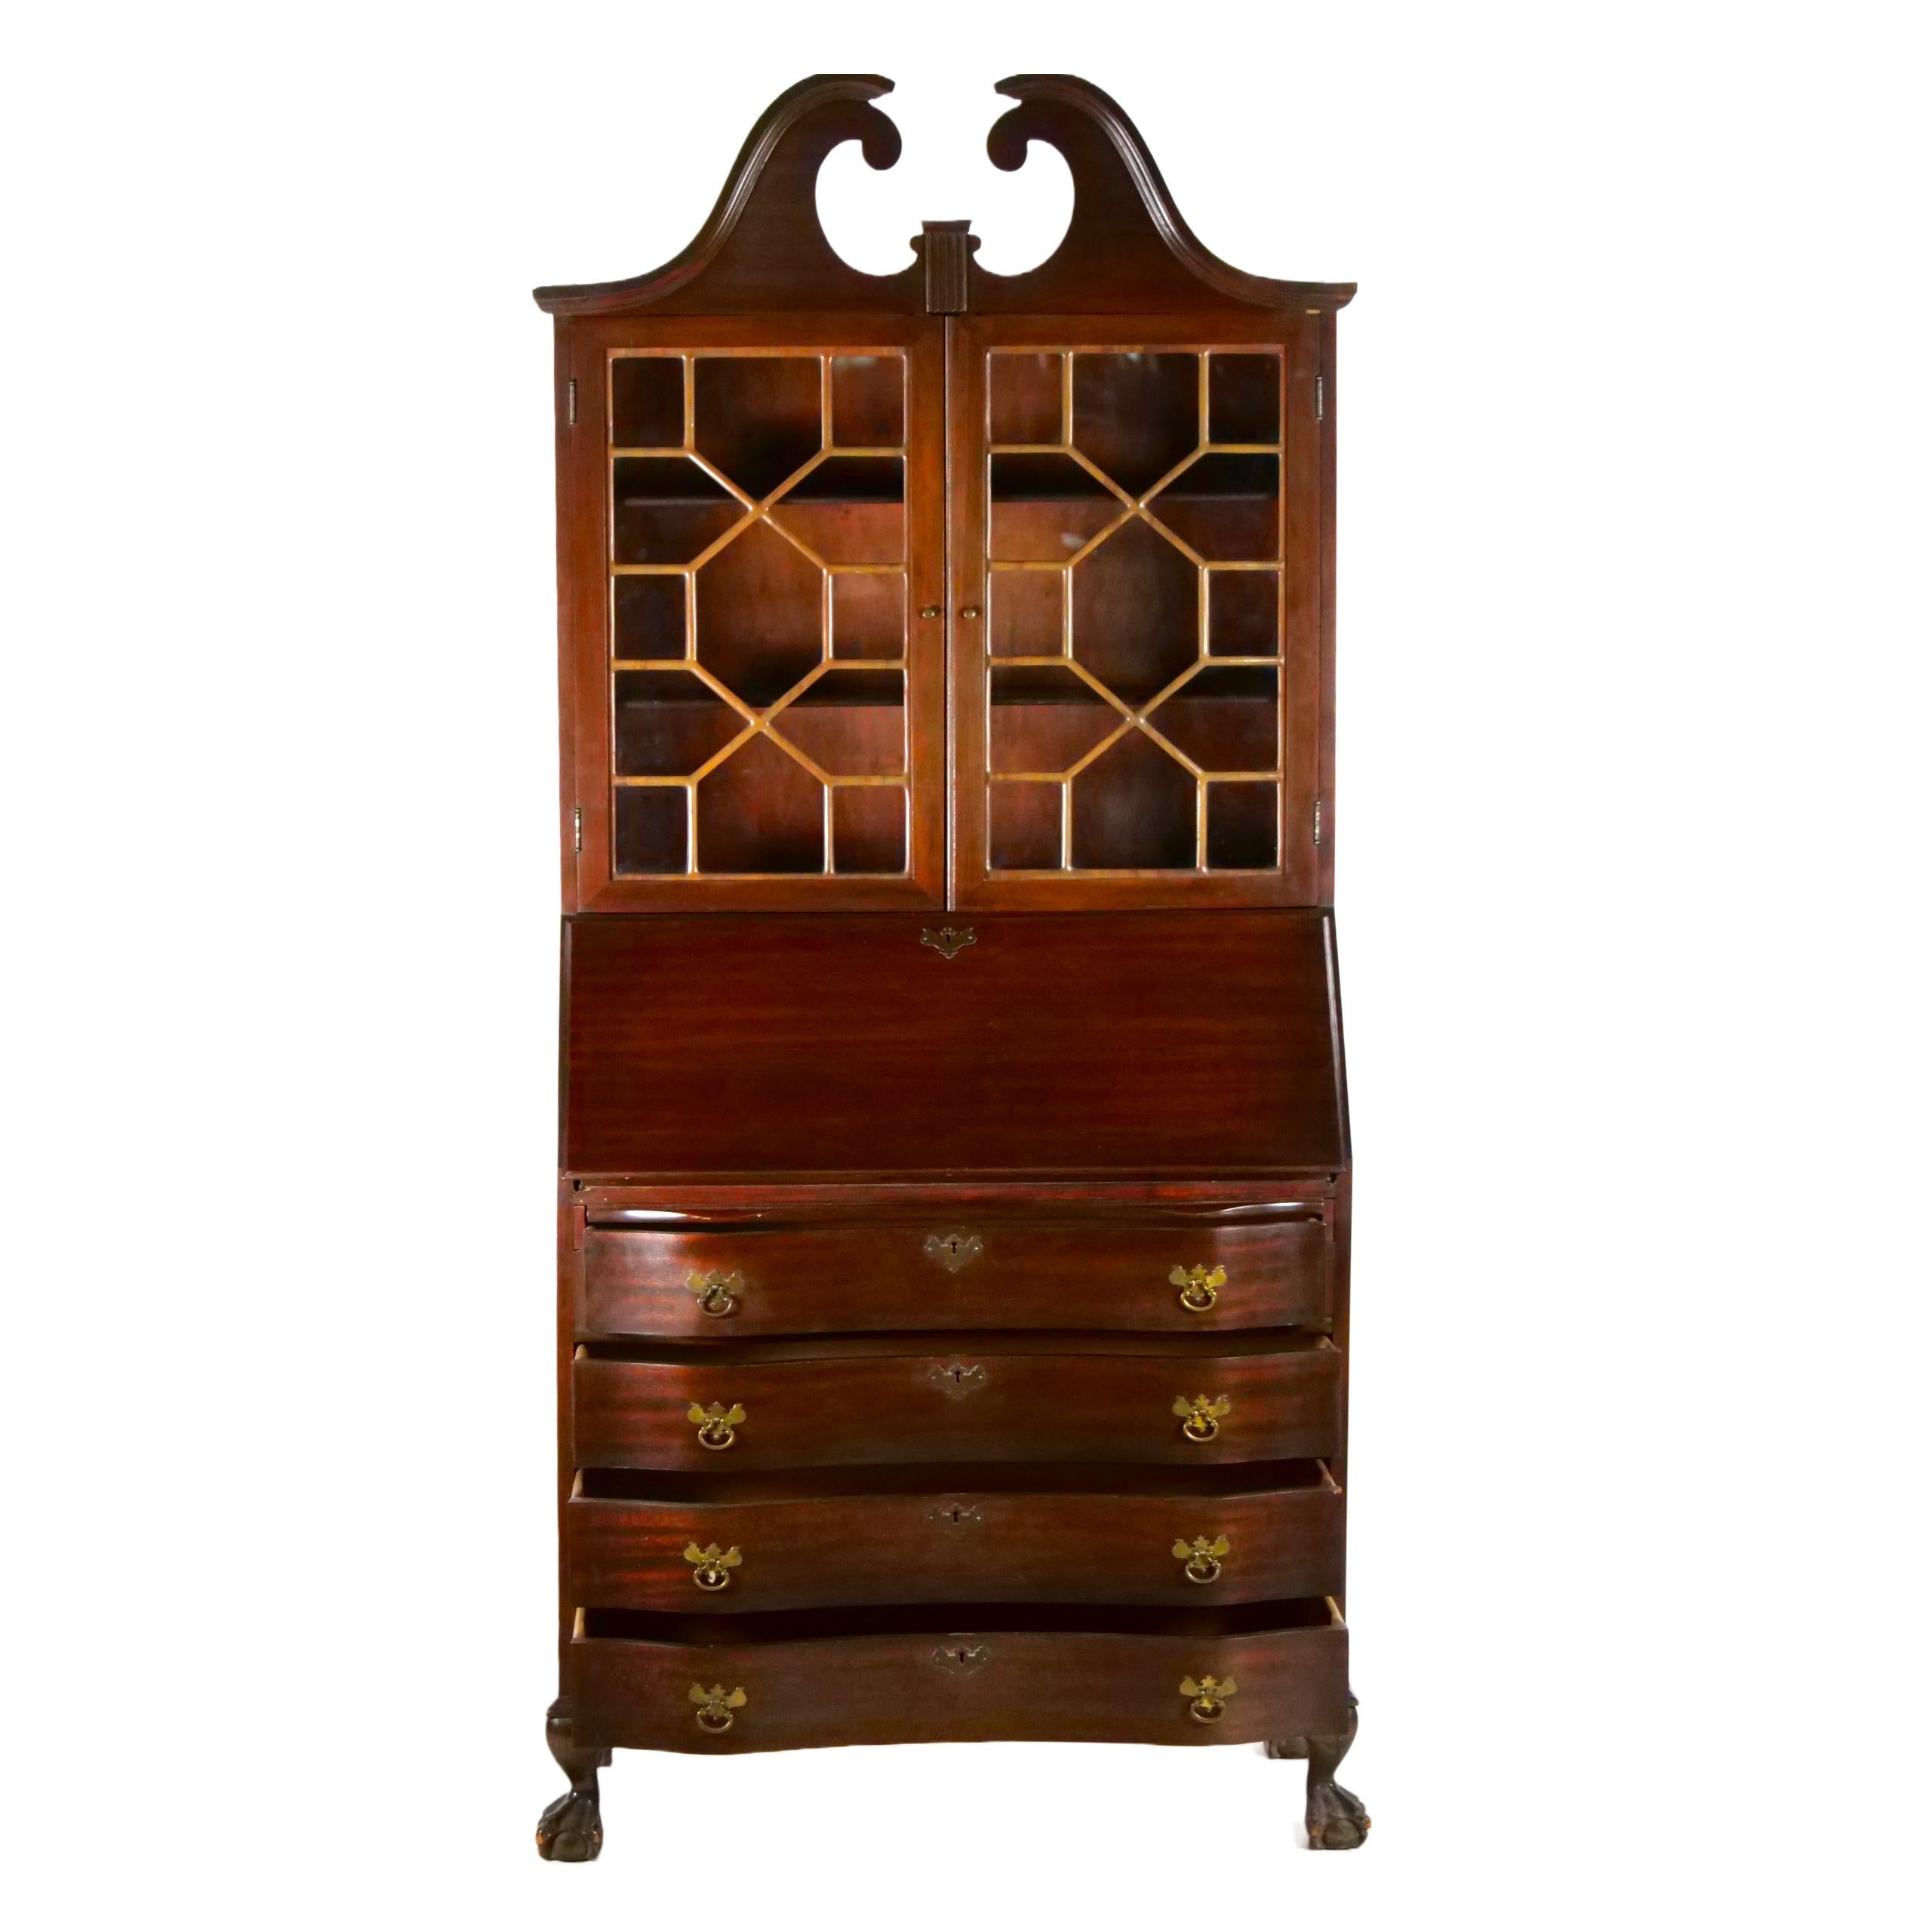 Chippendale style mahogany wood secretary desk / bookcase cabinet with slant front detail in one piece construction. The Upper cabinet features two wood framed glass door panels and two adjustable wood shelves behind dual glass doors with fretwork.